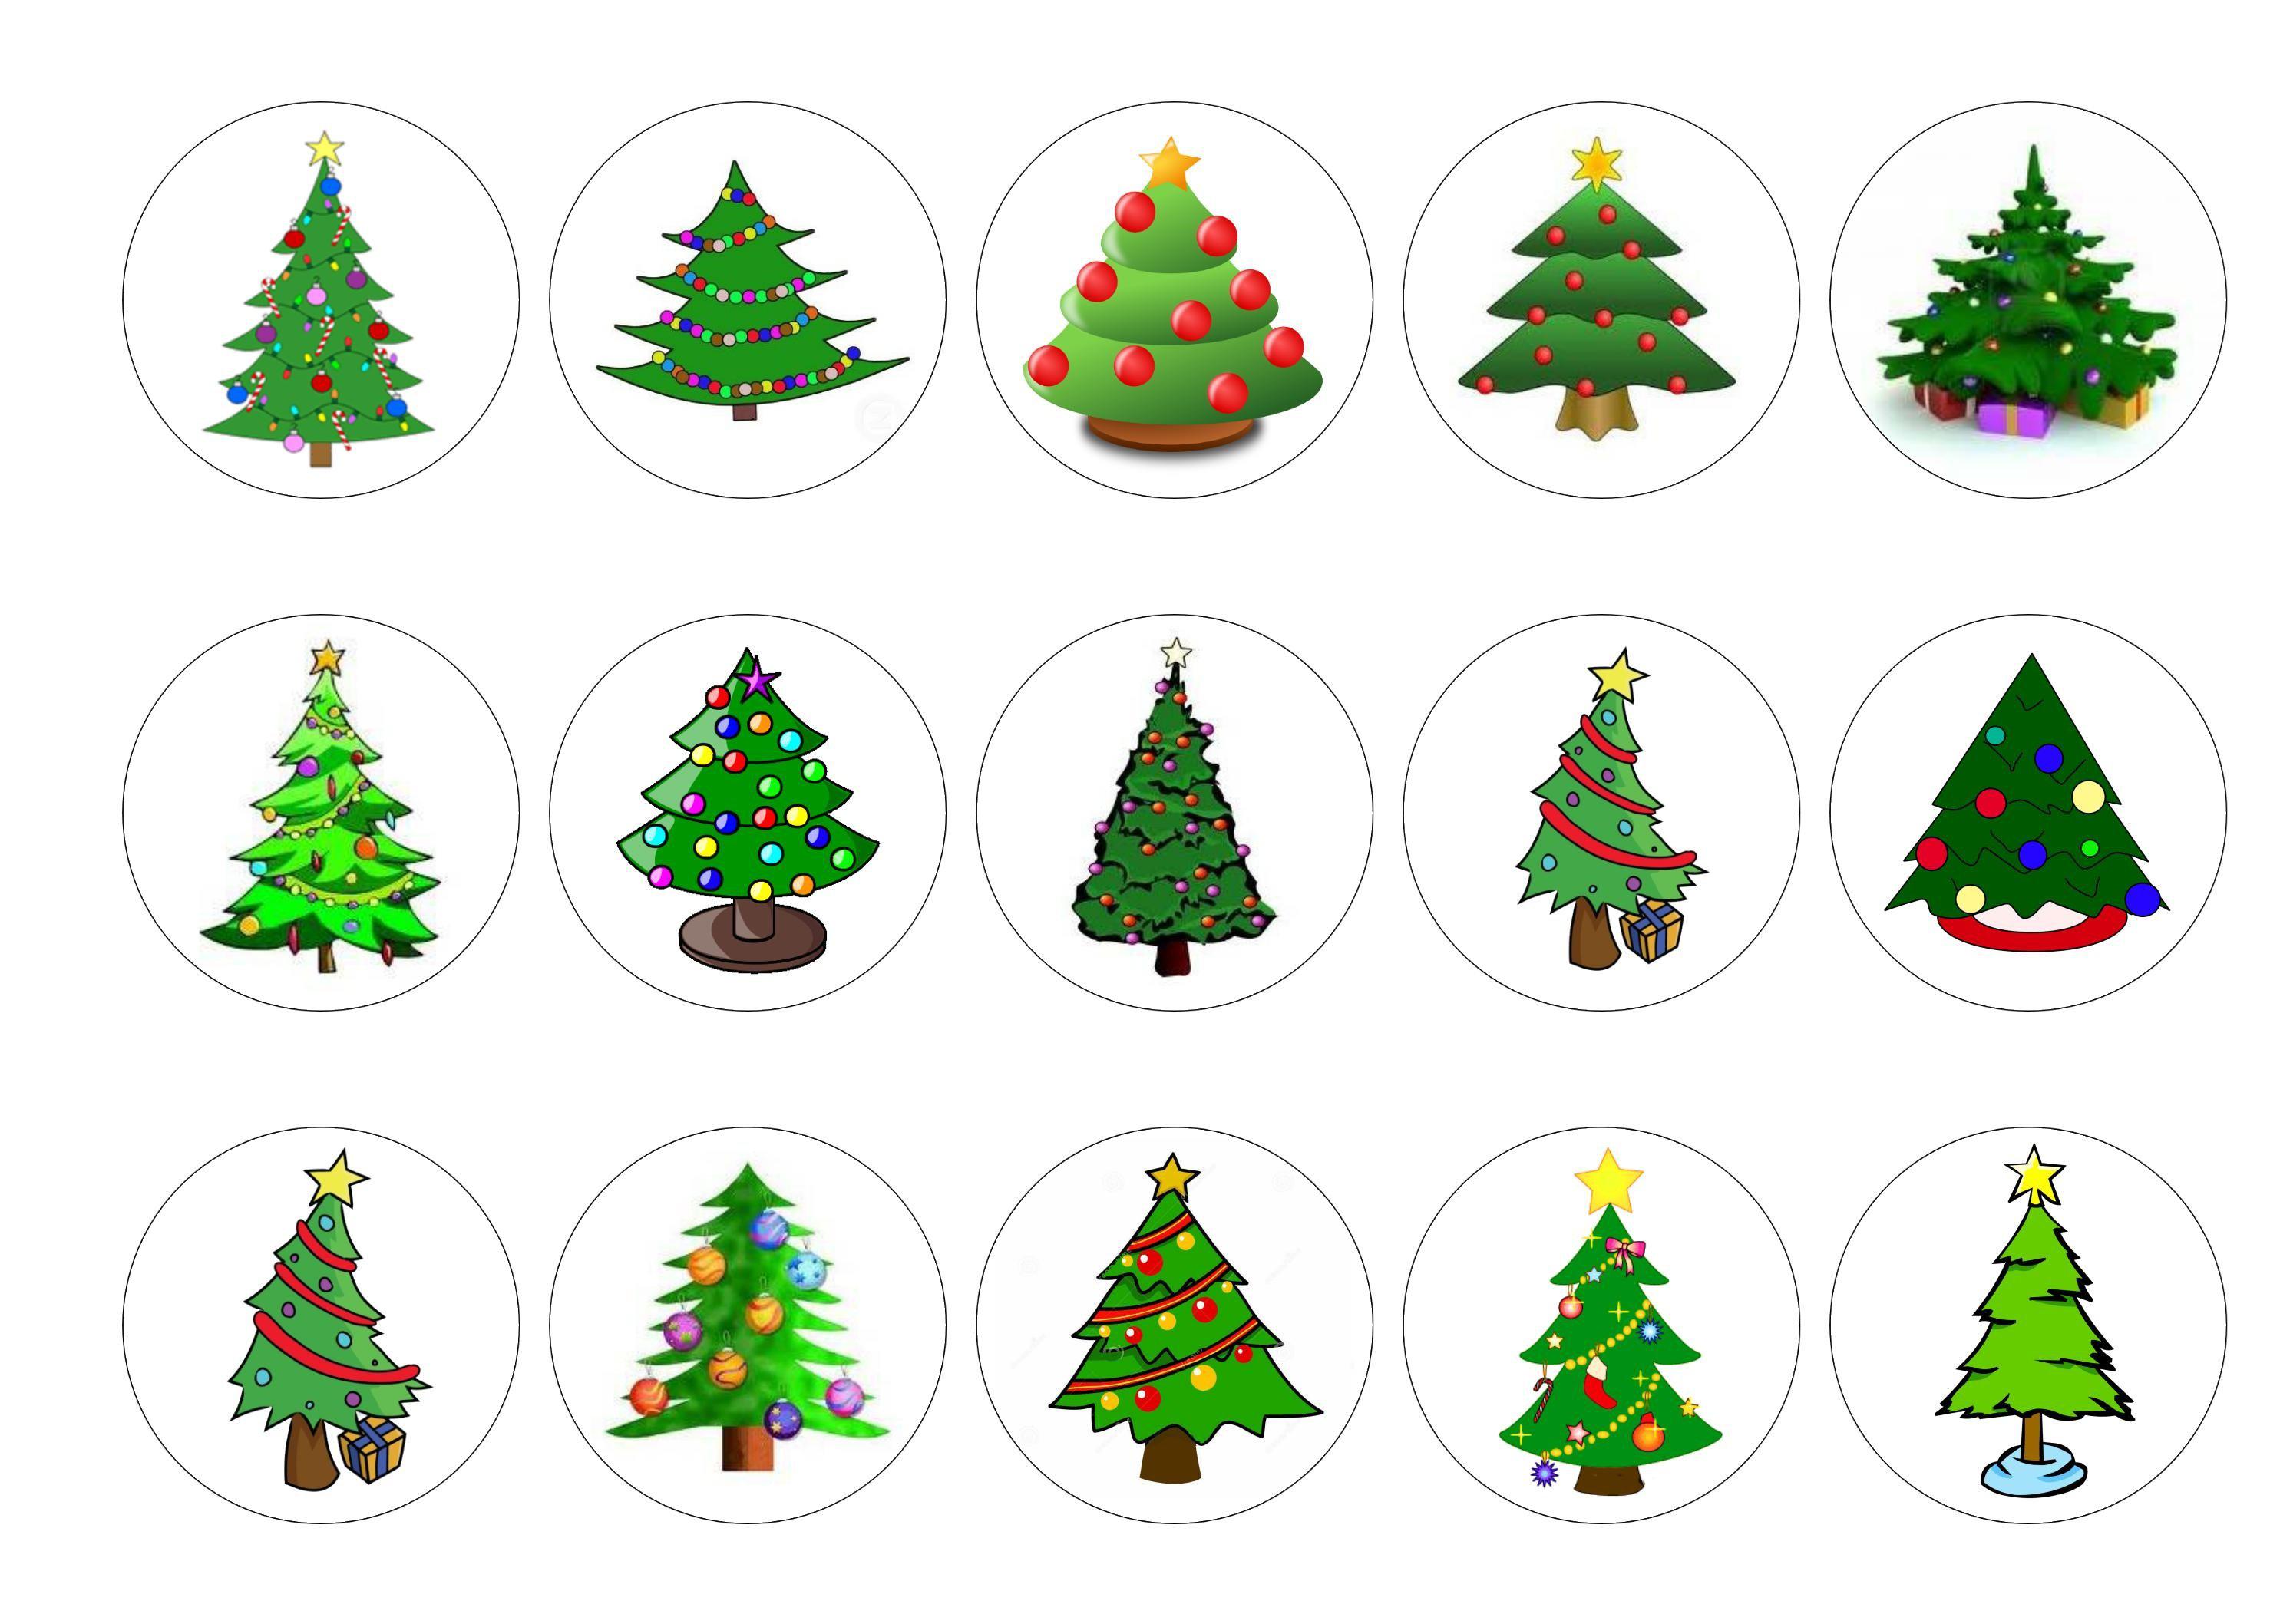 15 printed cupcake toppers with cartoon Christmas Trees